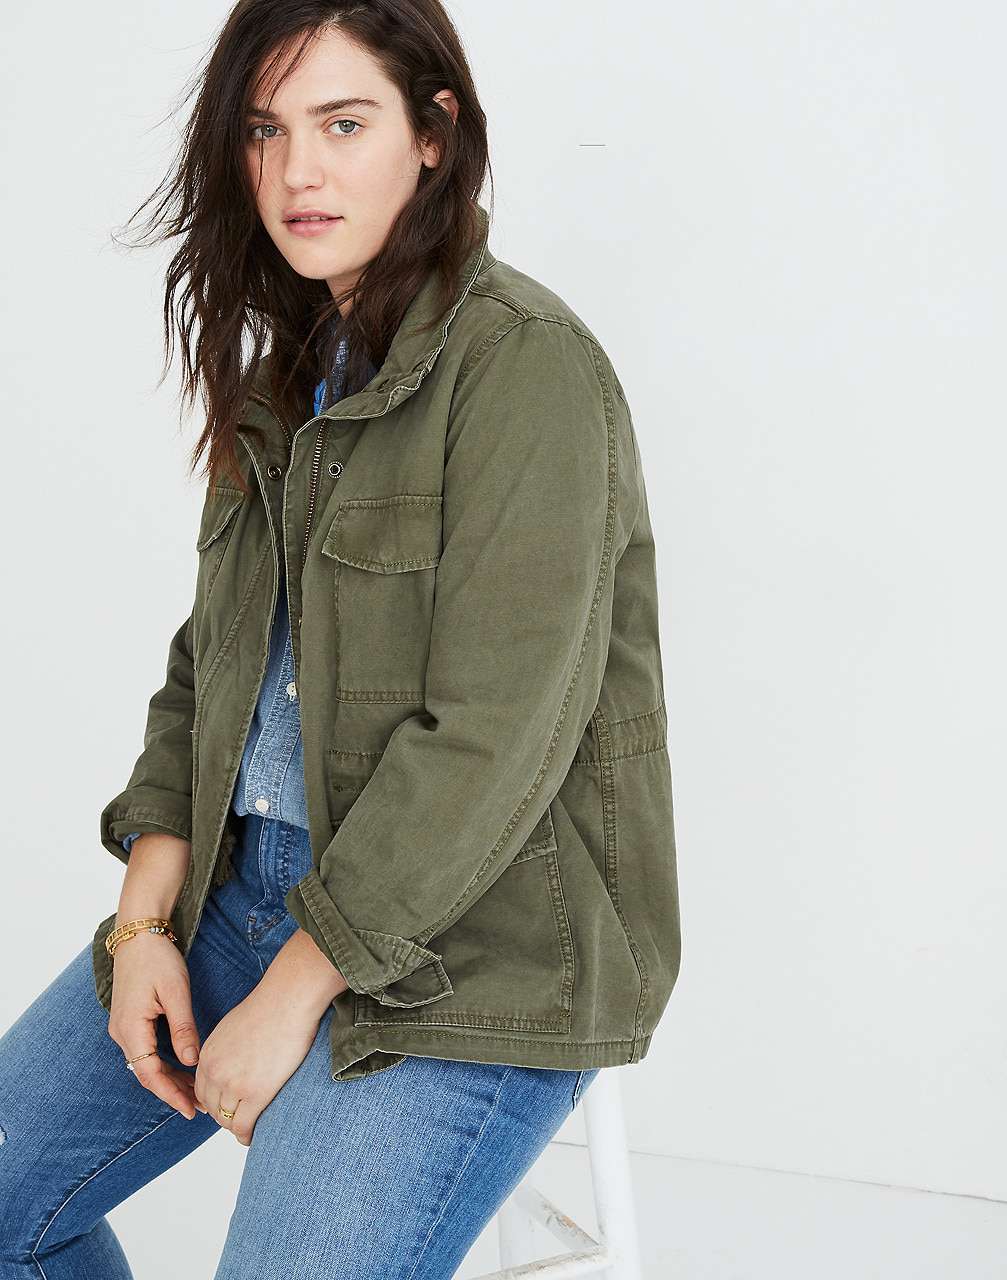 Madewell Launched Plus Sizes: Here's What to Buy | PEOPLE.com